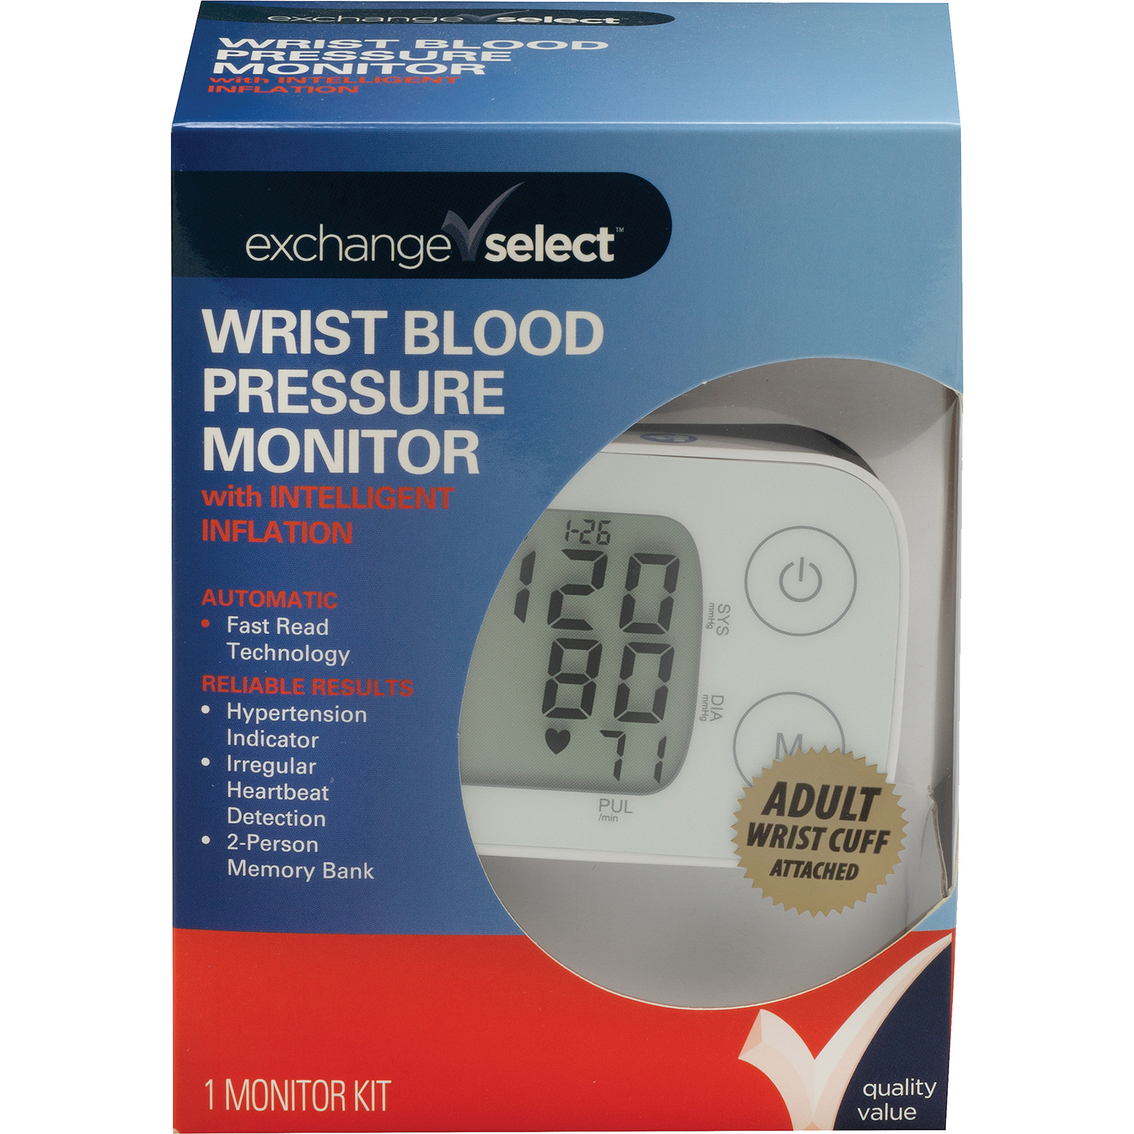 Exchange Select Automatic Digital Wrist Blood Pressure Monitor - Image 2 of 3